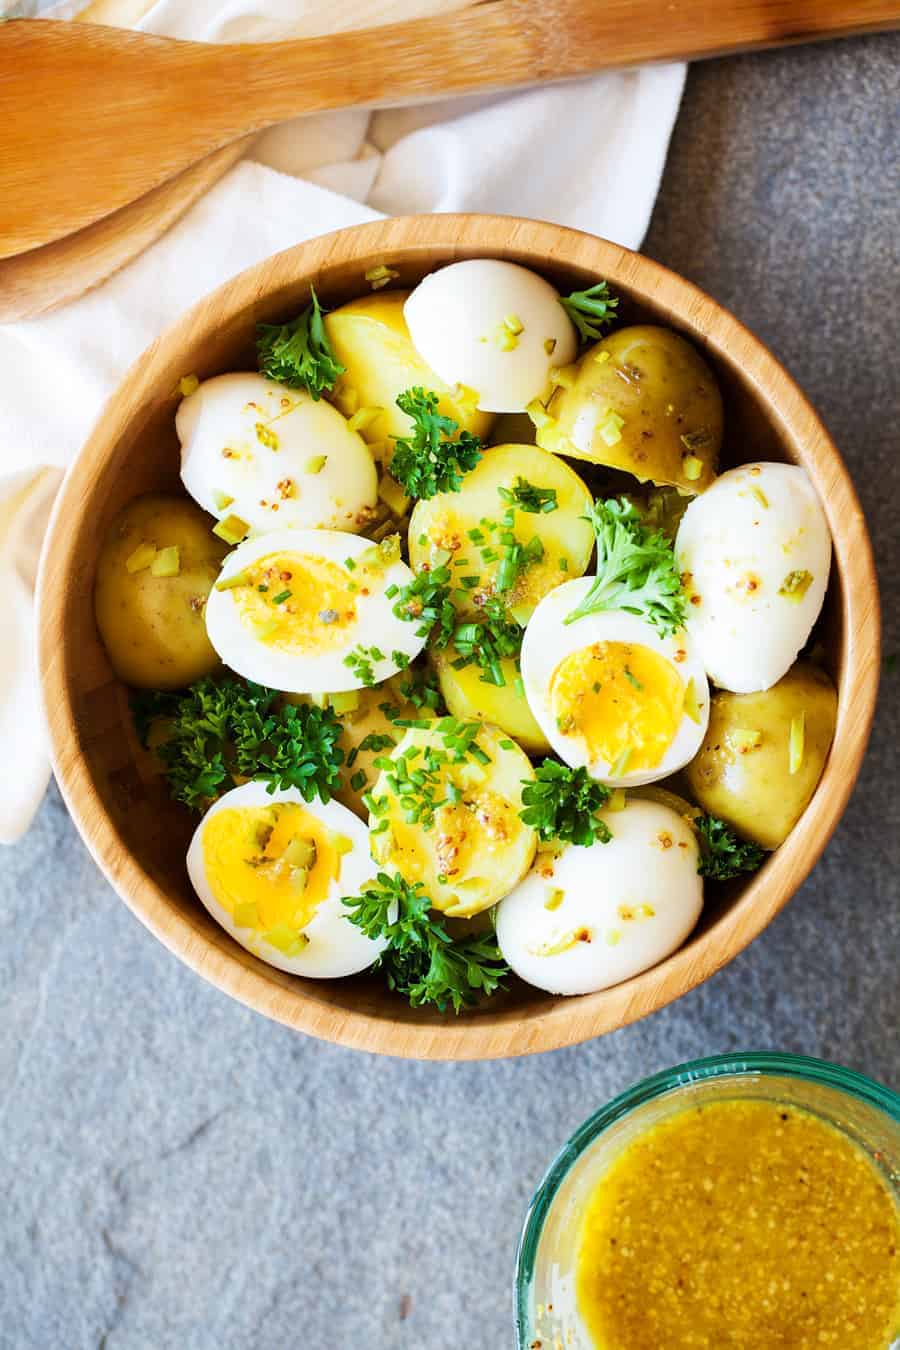 Potato Salad From Overhead in a Wooden Bowl